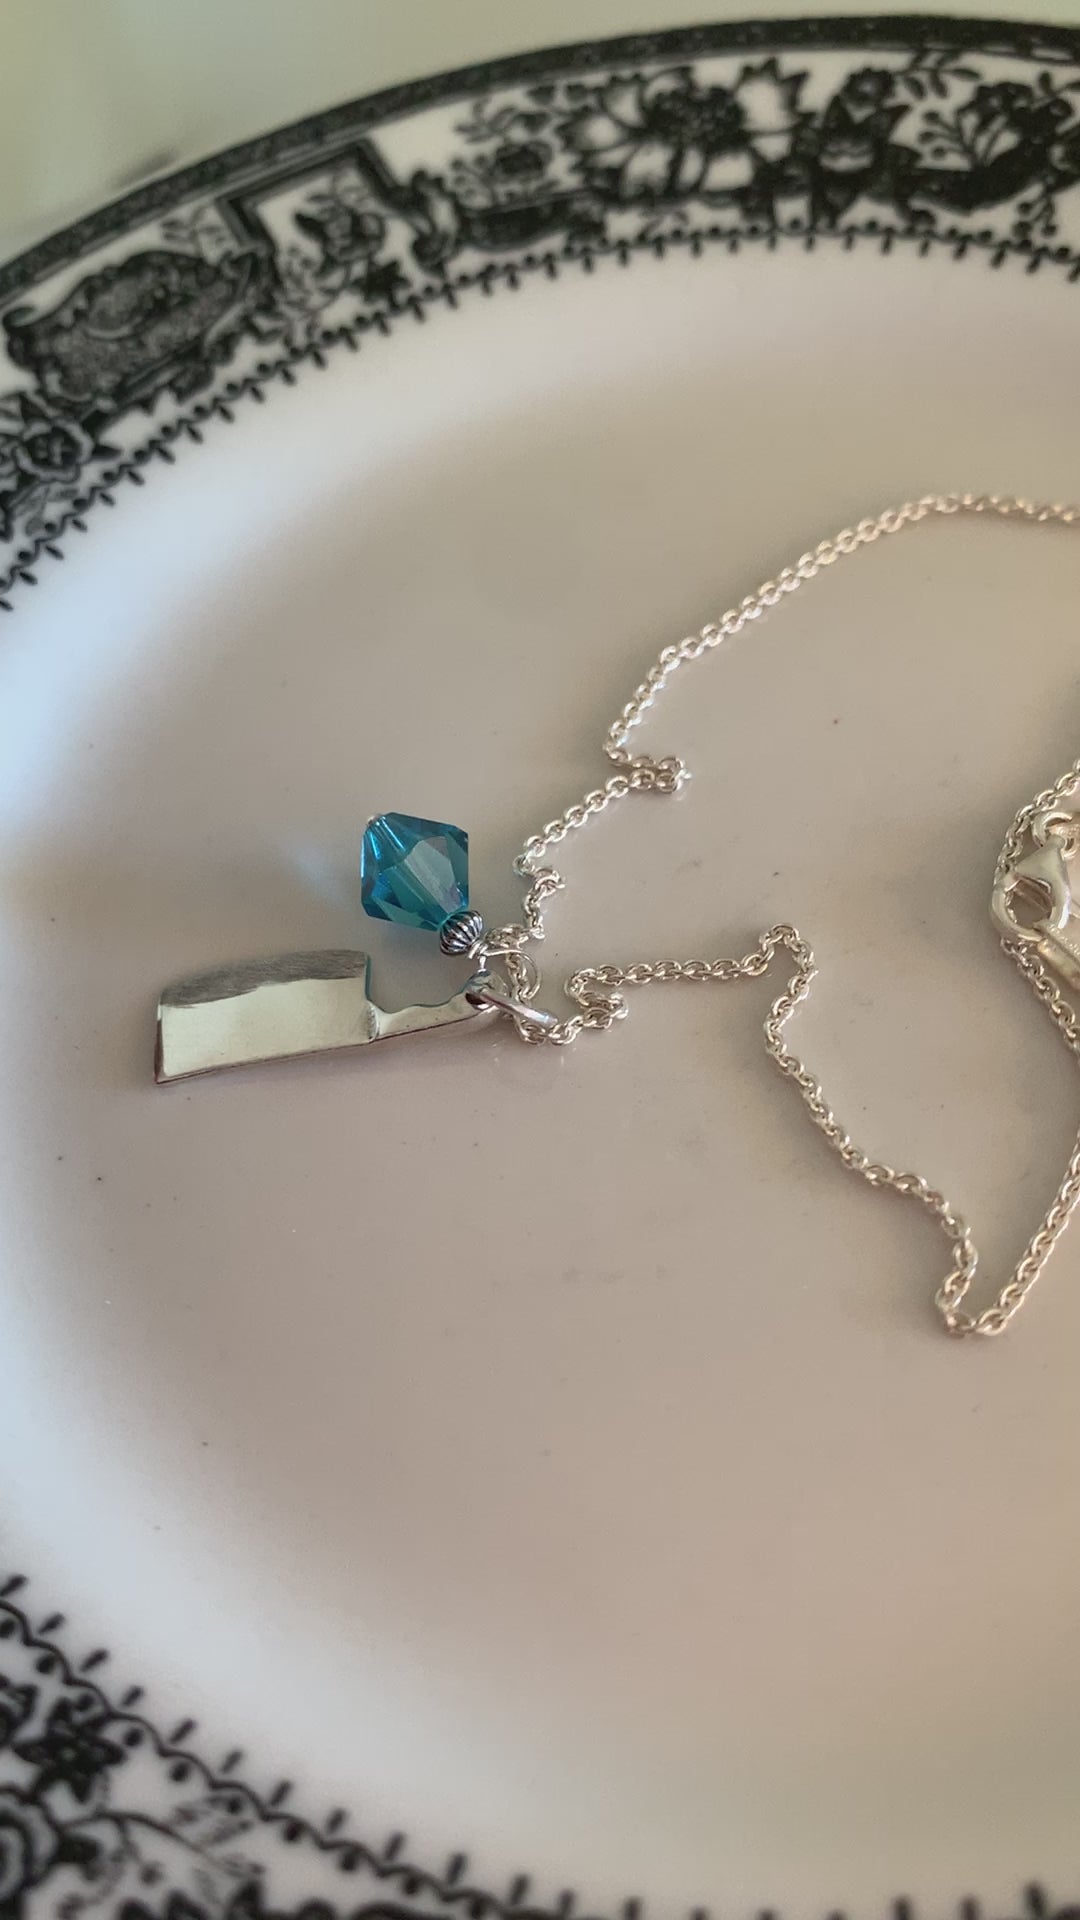 cleaver necklace with aqua crystal video